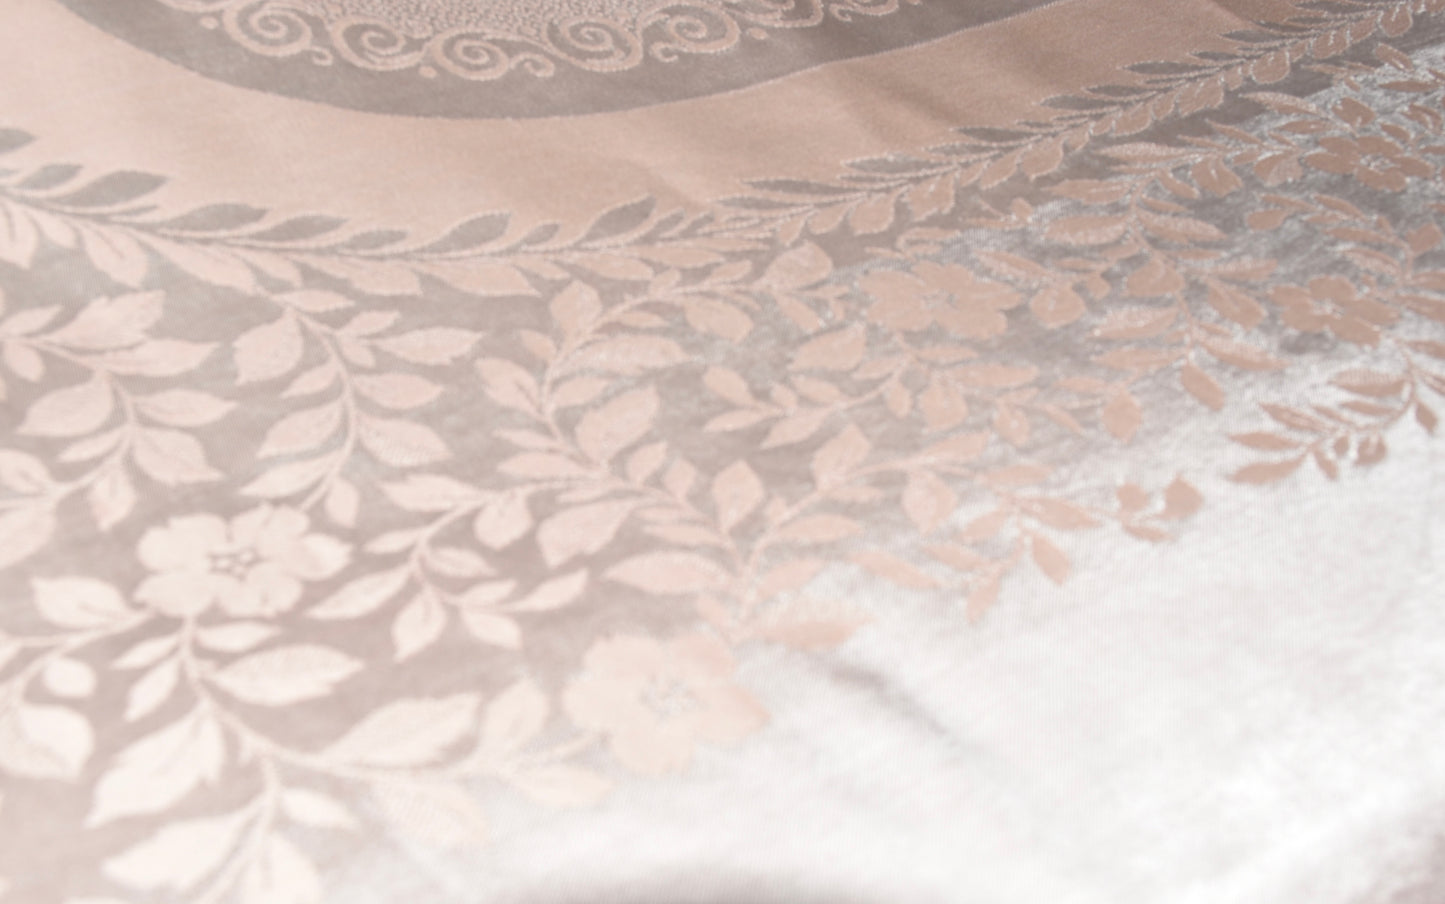 Original Irish Damask  Size: L208cm x W164cm Colour: Pink Peach Blush Mille Fleurs Roll Hemmed Cotton & Damask made in Ireland No R8 - Pattern Number 3 Condition: Very Good, As New, Never Used